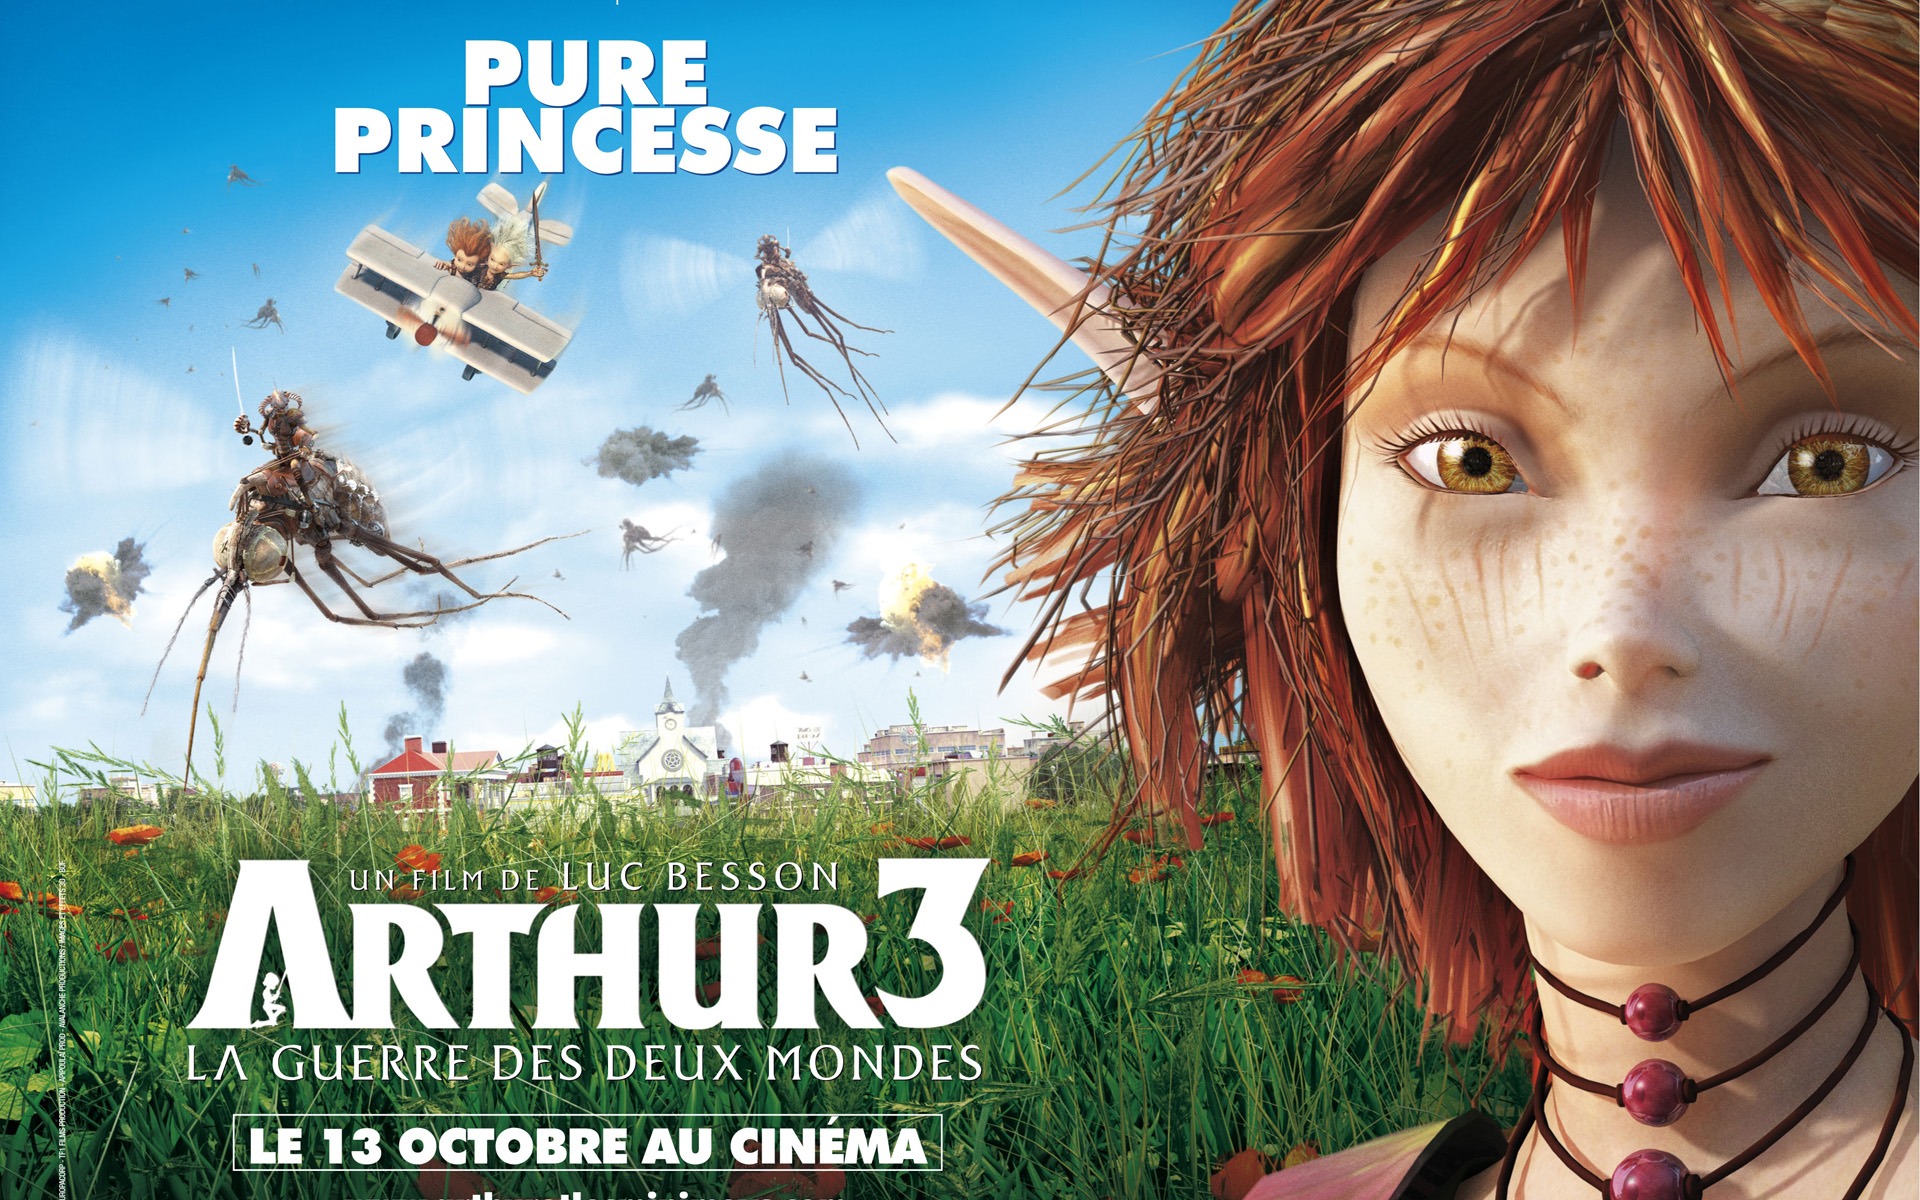 arthur 3 the war of the two worlds